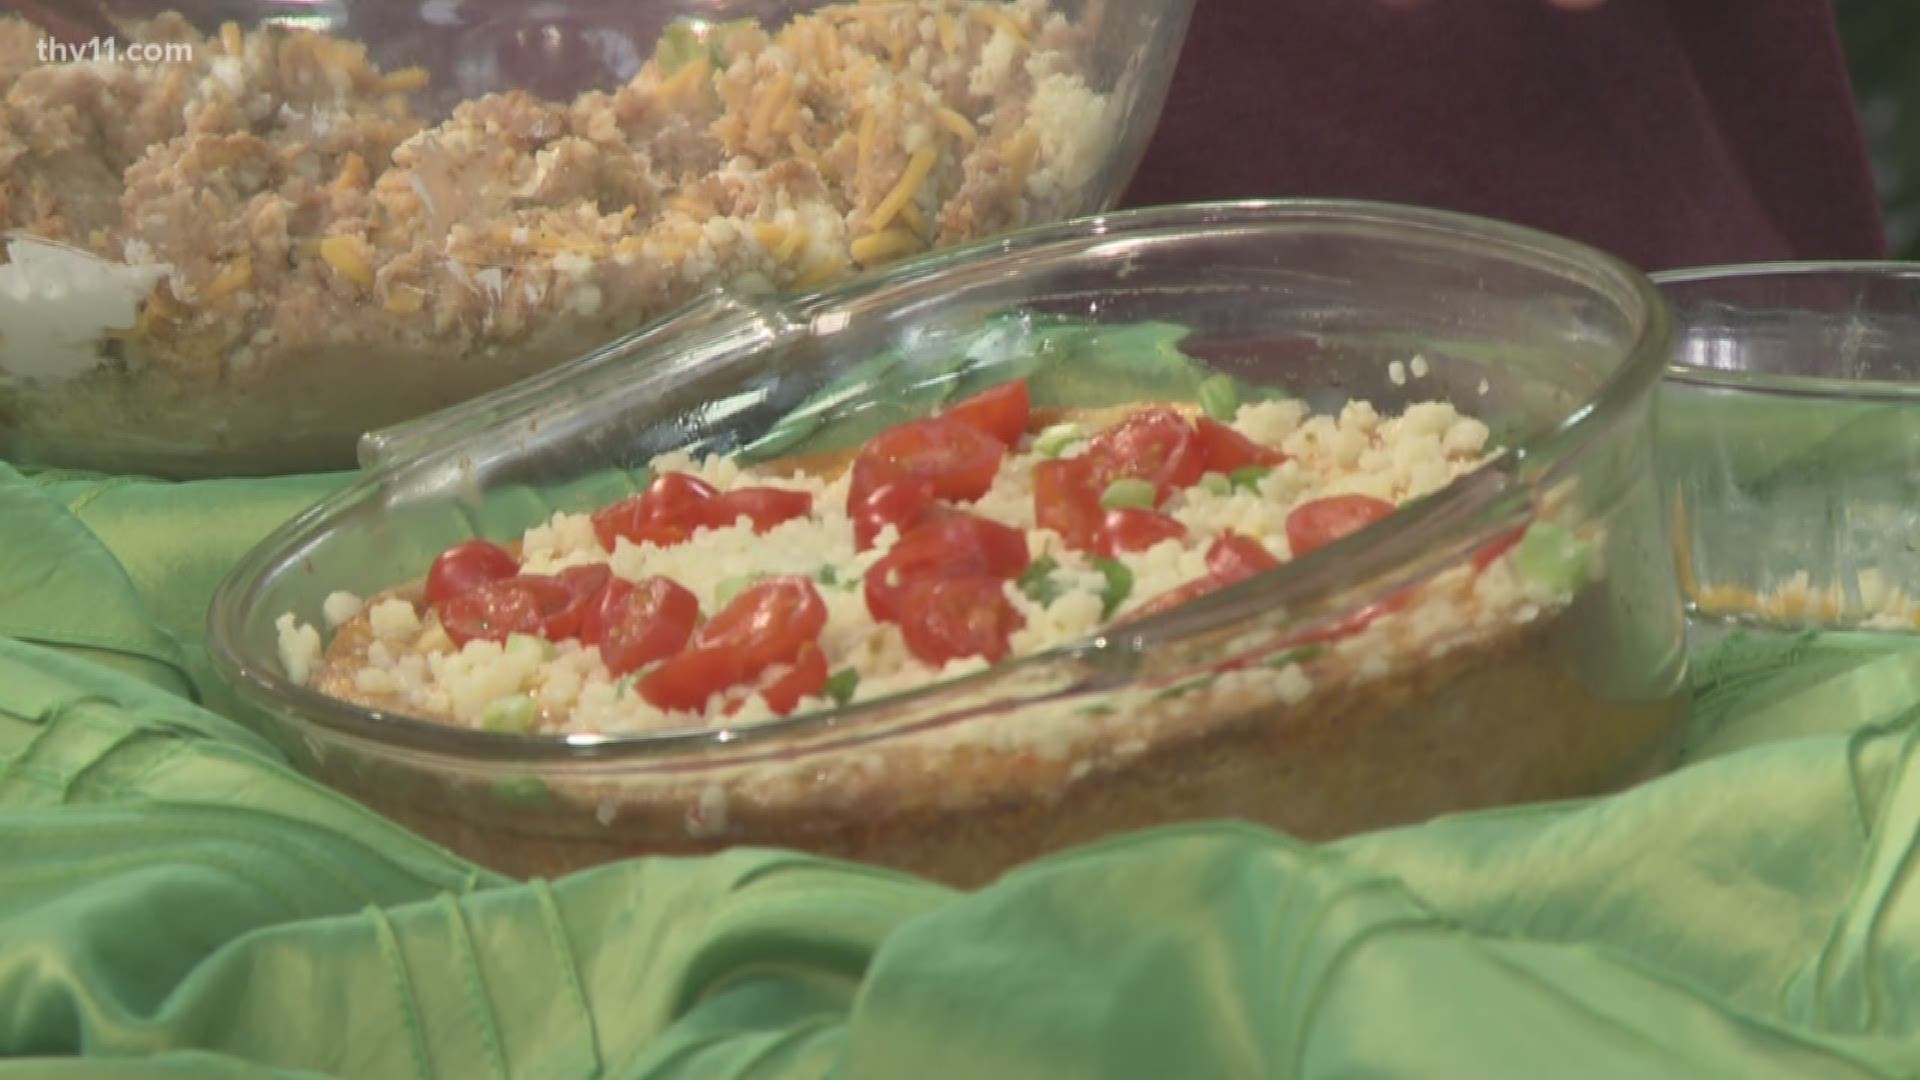 During football season we know a lot of you are looking for fun gameday snack ideas. We have Deanna Fleming here with us today and she's making refried bean dip!